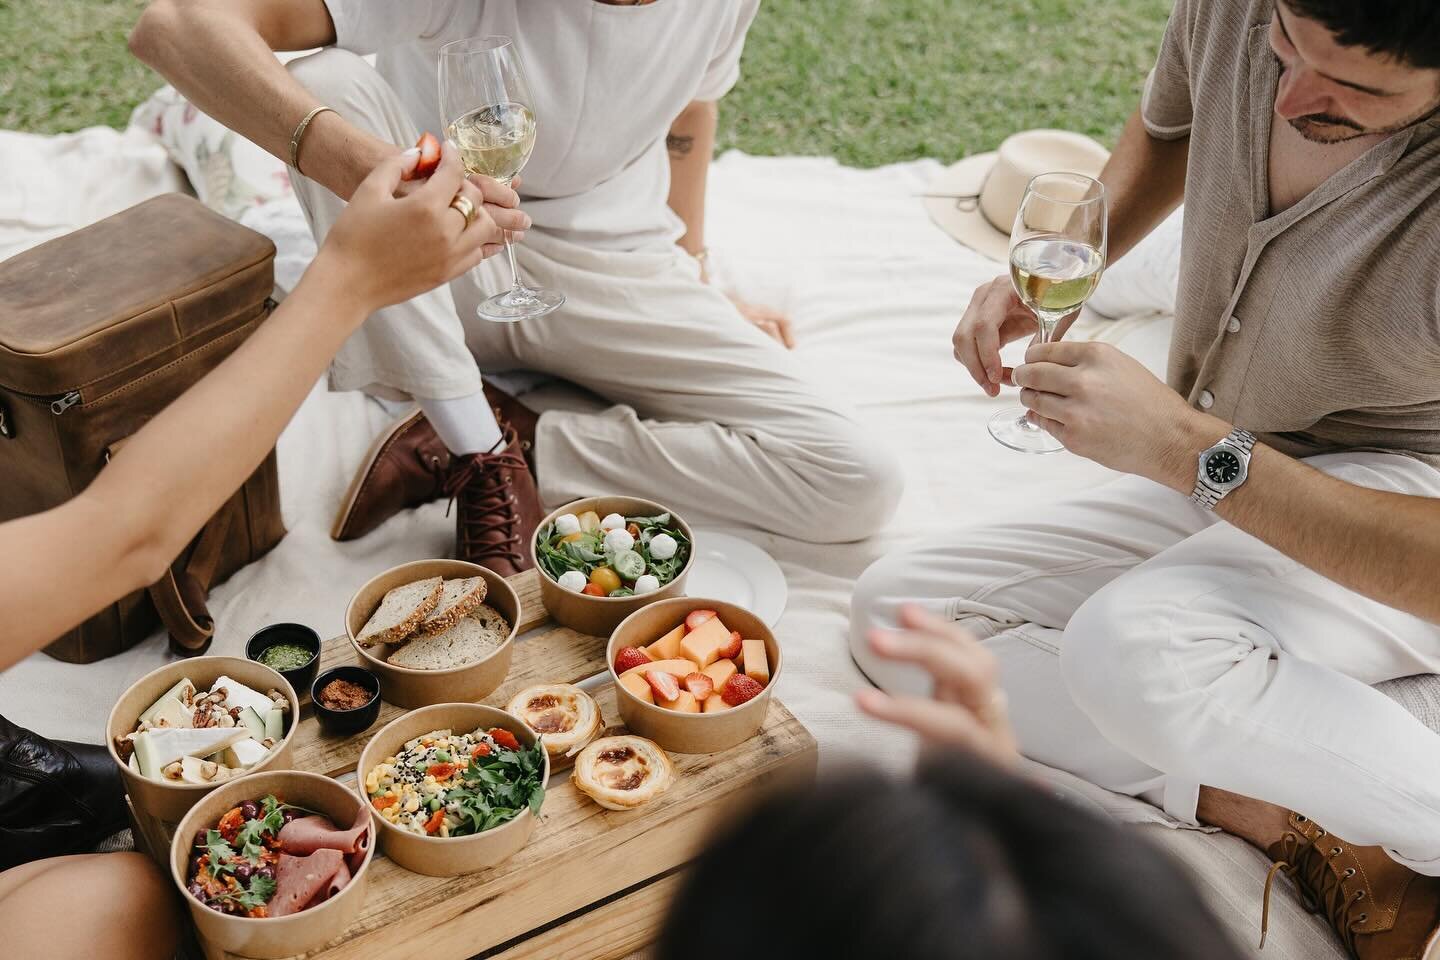 Hot summer days under our tree in front of our country house, sipping on Doolhof wines and eating amazing finger foods from @mila_atdoolhof #picnic 

Cheers to the weekend, everybody!

#thedoolhof #doolhofwineestate #doolhofwines #doolhofwine #luxury